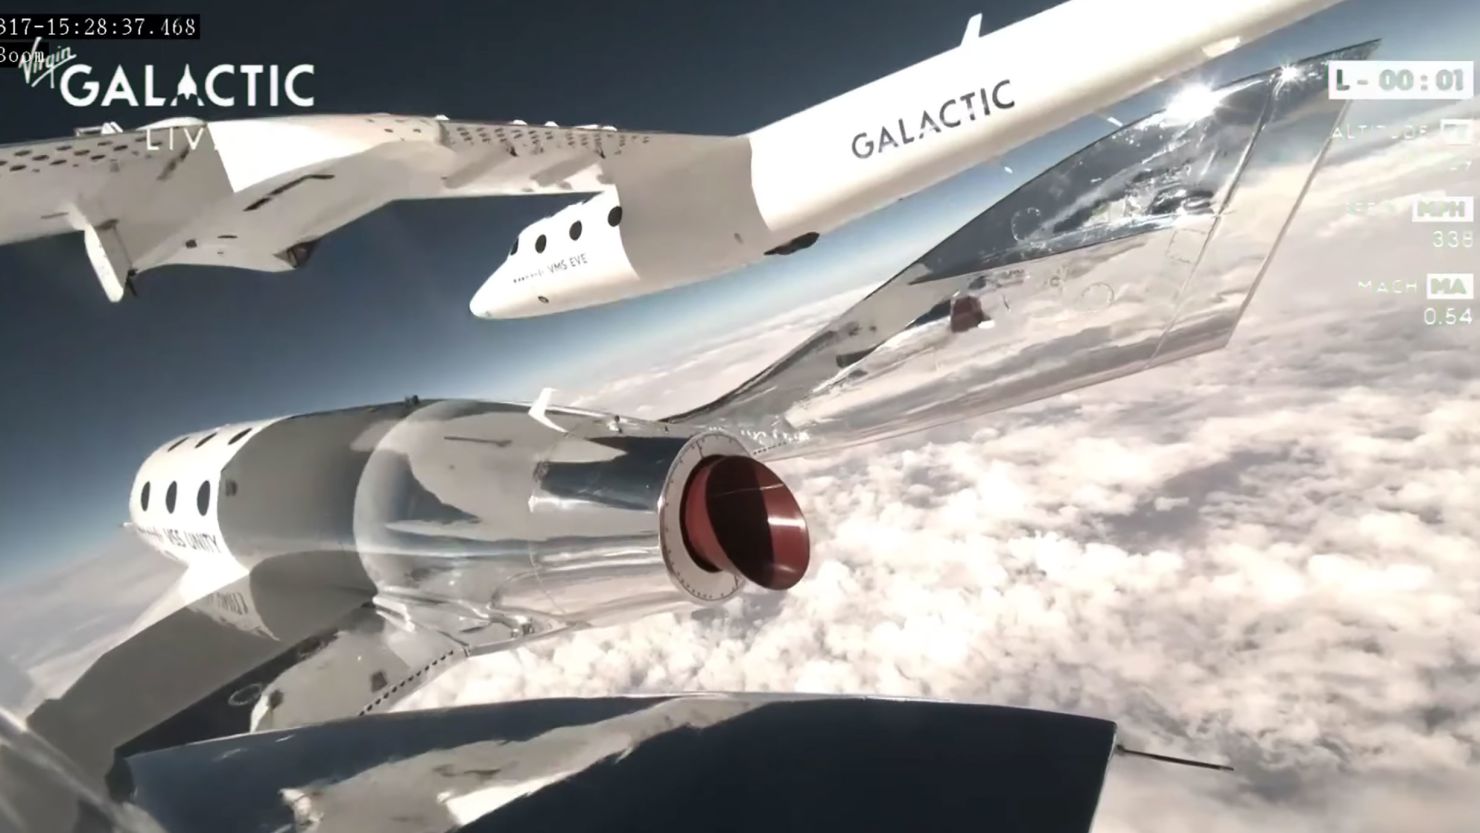 Virgin Galactic’s first commercial spaceflight launched from the company's spaceport in New Mexico on June 29.